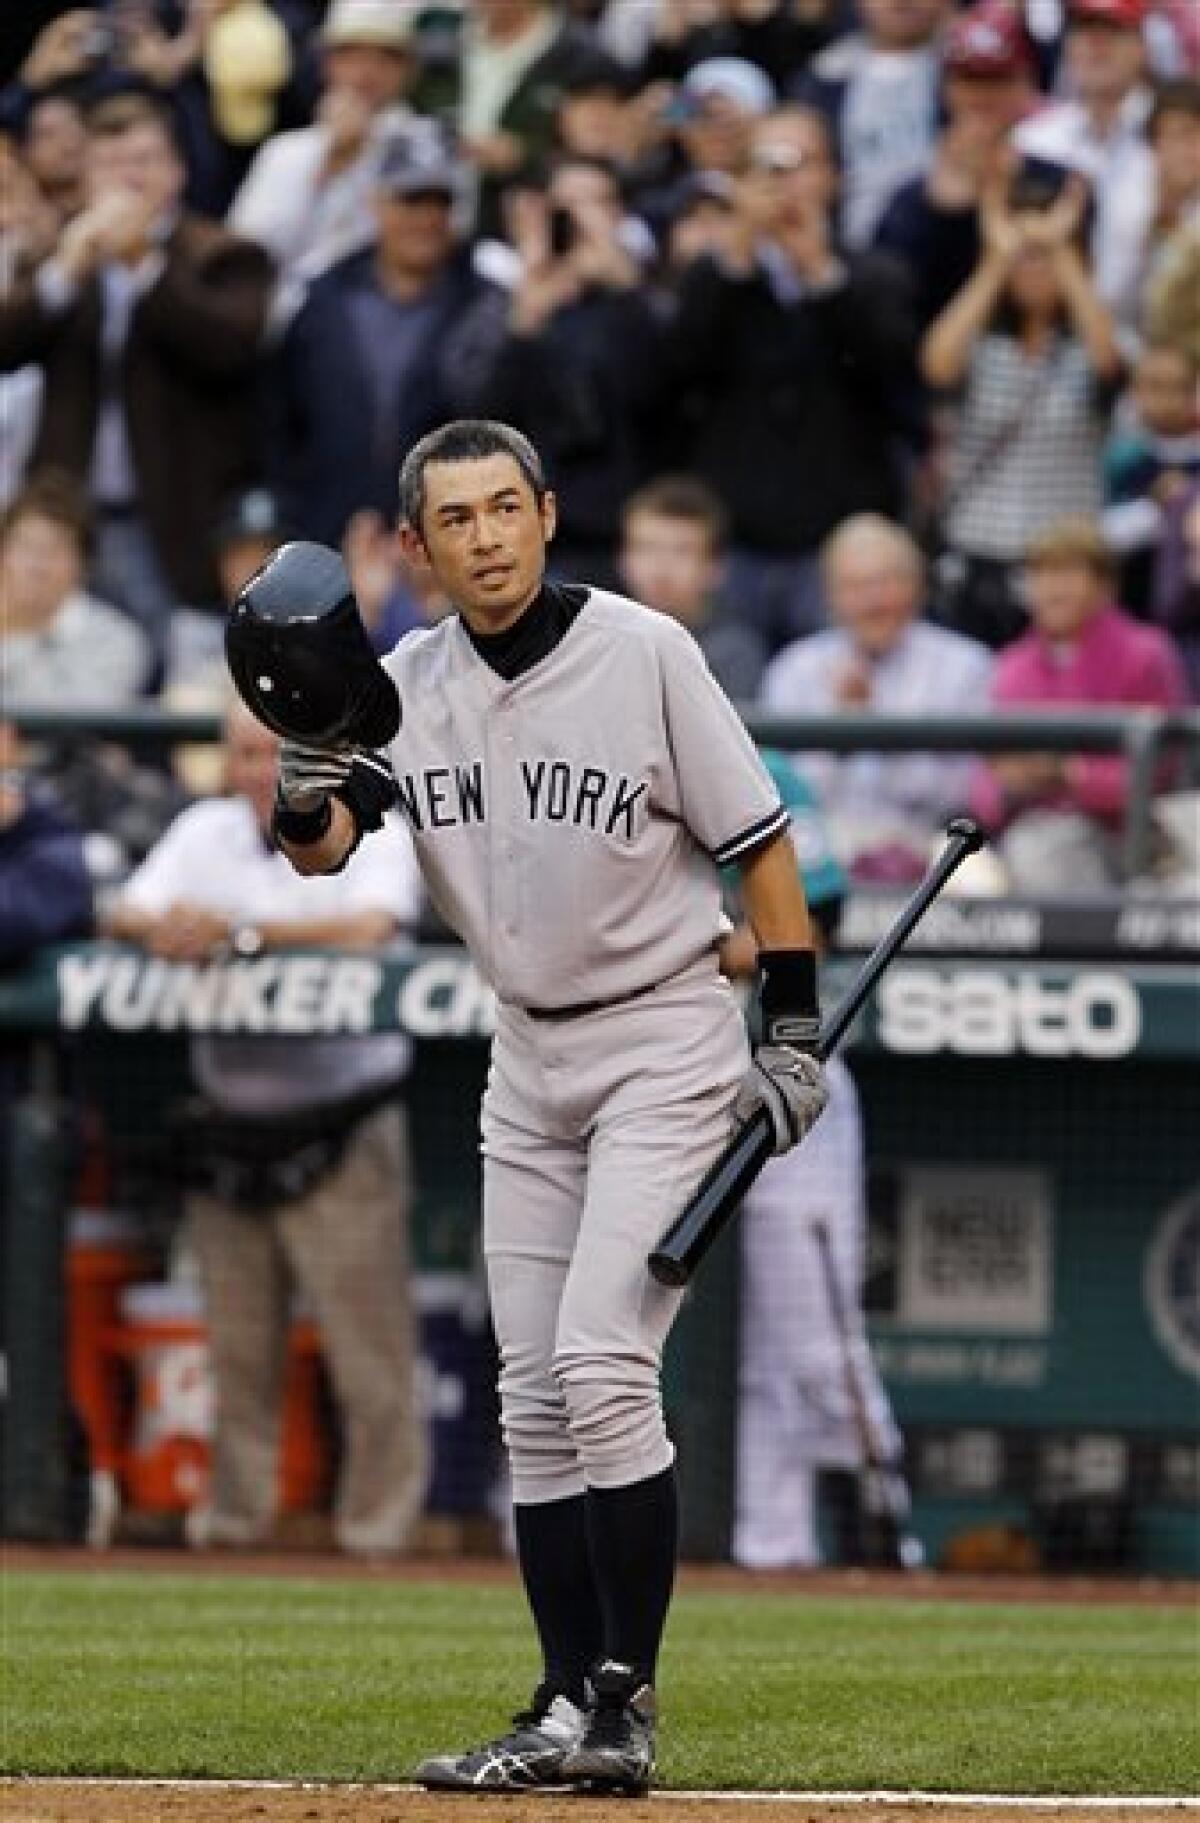 New York Yankees' Ichiro Suzuki doffs his batting helmet as fans cheer as he steps up to bat against the Seattle Mariners in the third inning of a baseball game Monday, July 23, 2012, in Seattle. The Mariners announced earlier in the day that Suzuki, who has played with the Mariners since 2001, was traded to the Yankees. (AP Photo/Elaine Thompson)